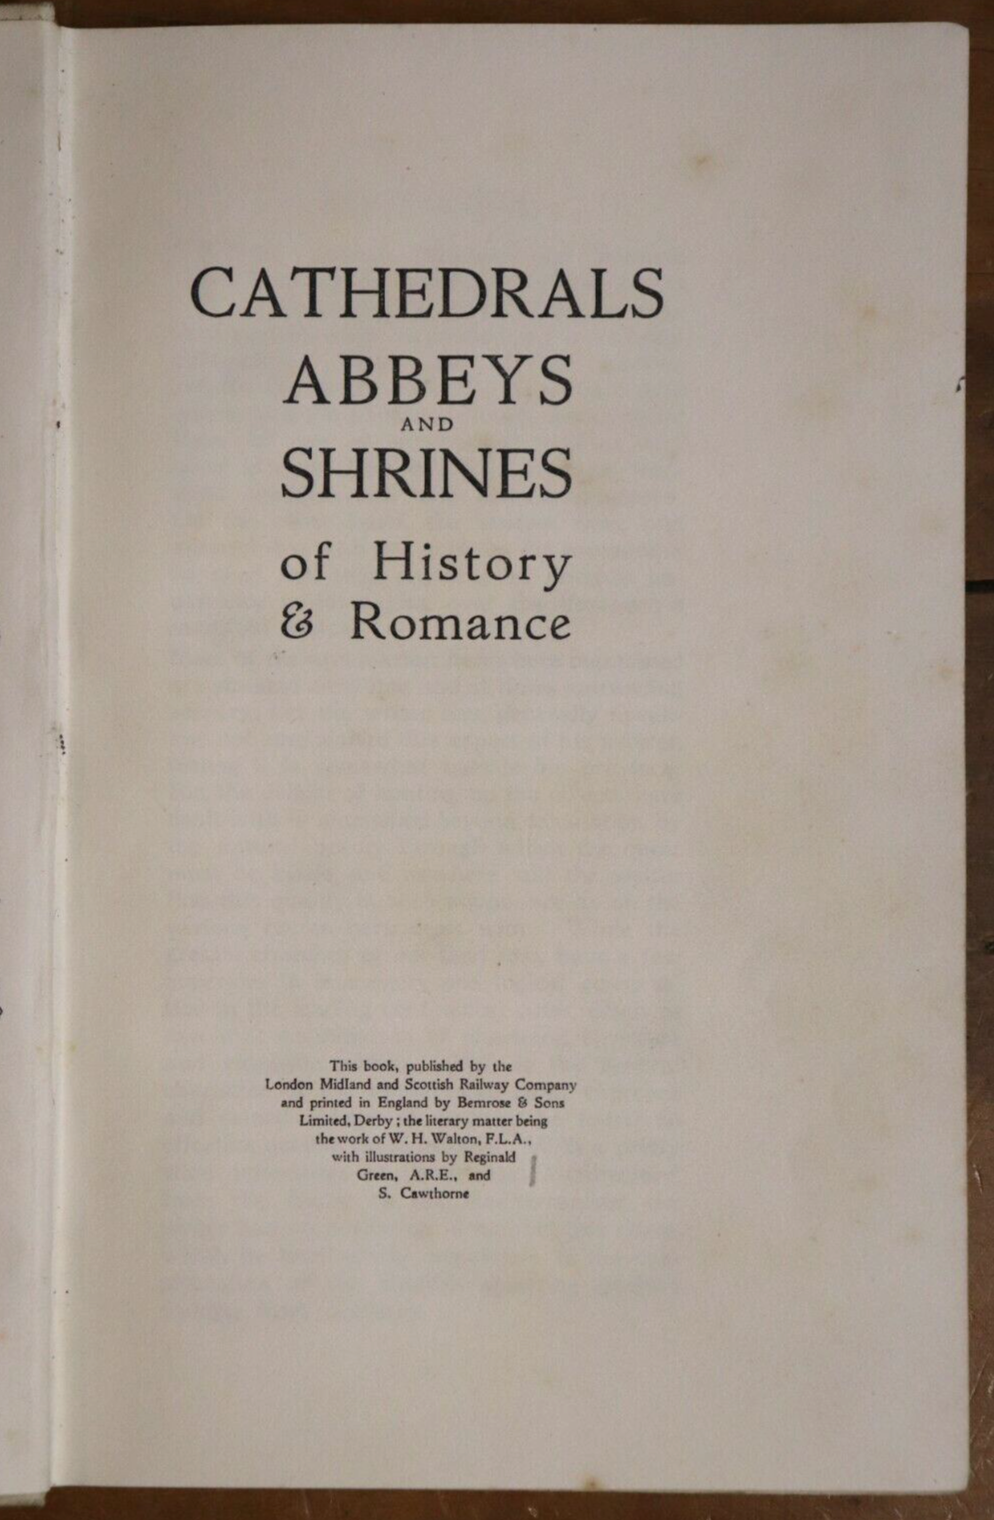 Cathedrals Abbeys & Shrines Of The British Isles - c1928 - Antique History Book - 0